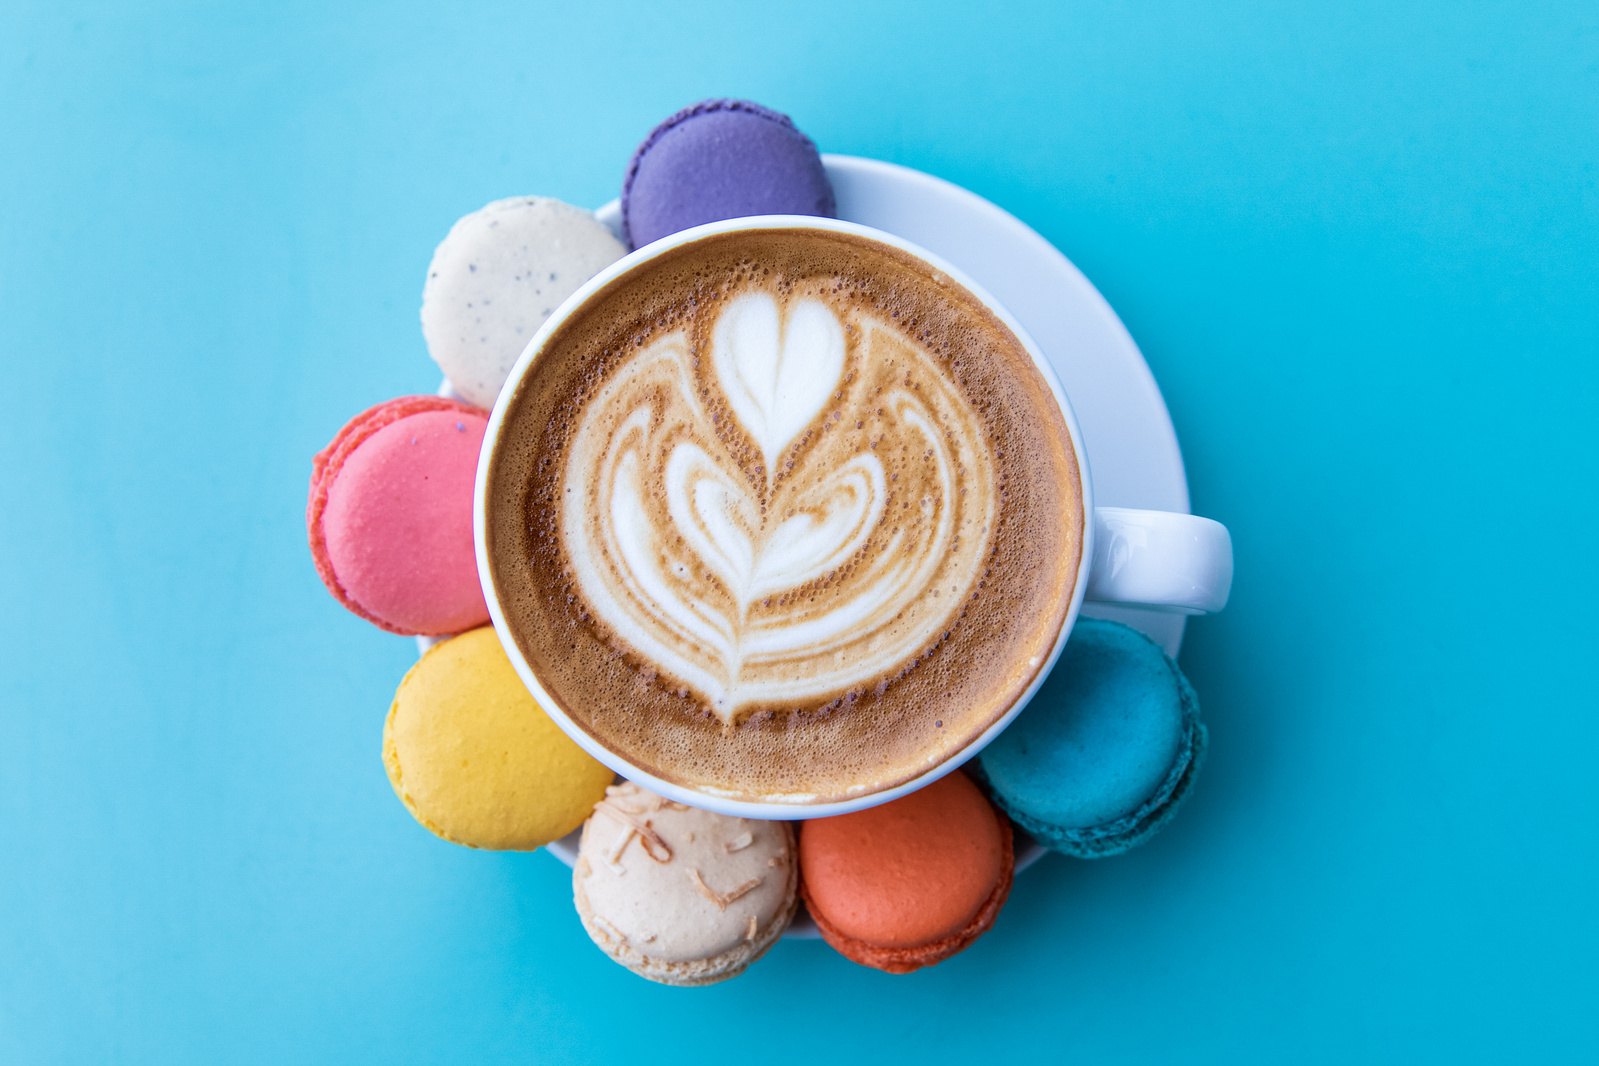 A latte with colorful macarons placed around the saucer on a blue background.